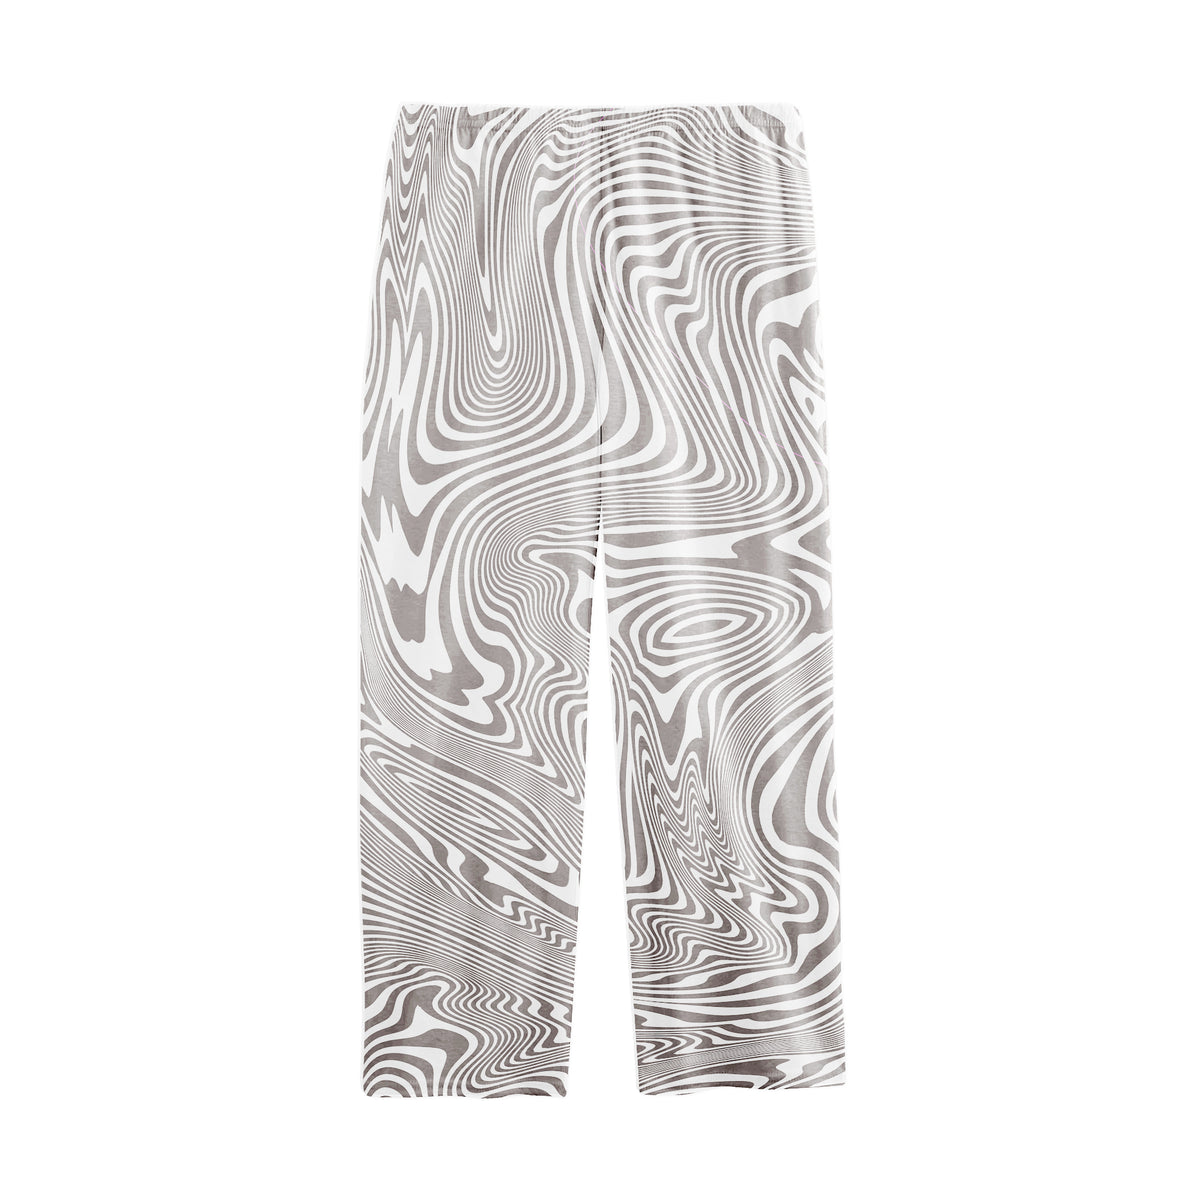 Grey Marble Effect Trouser